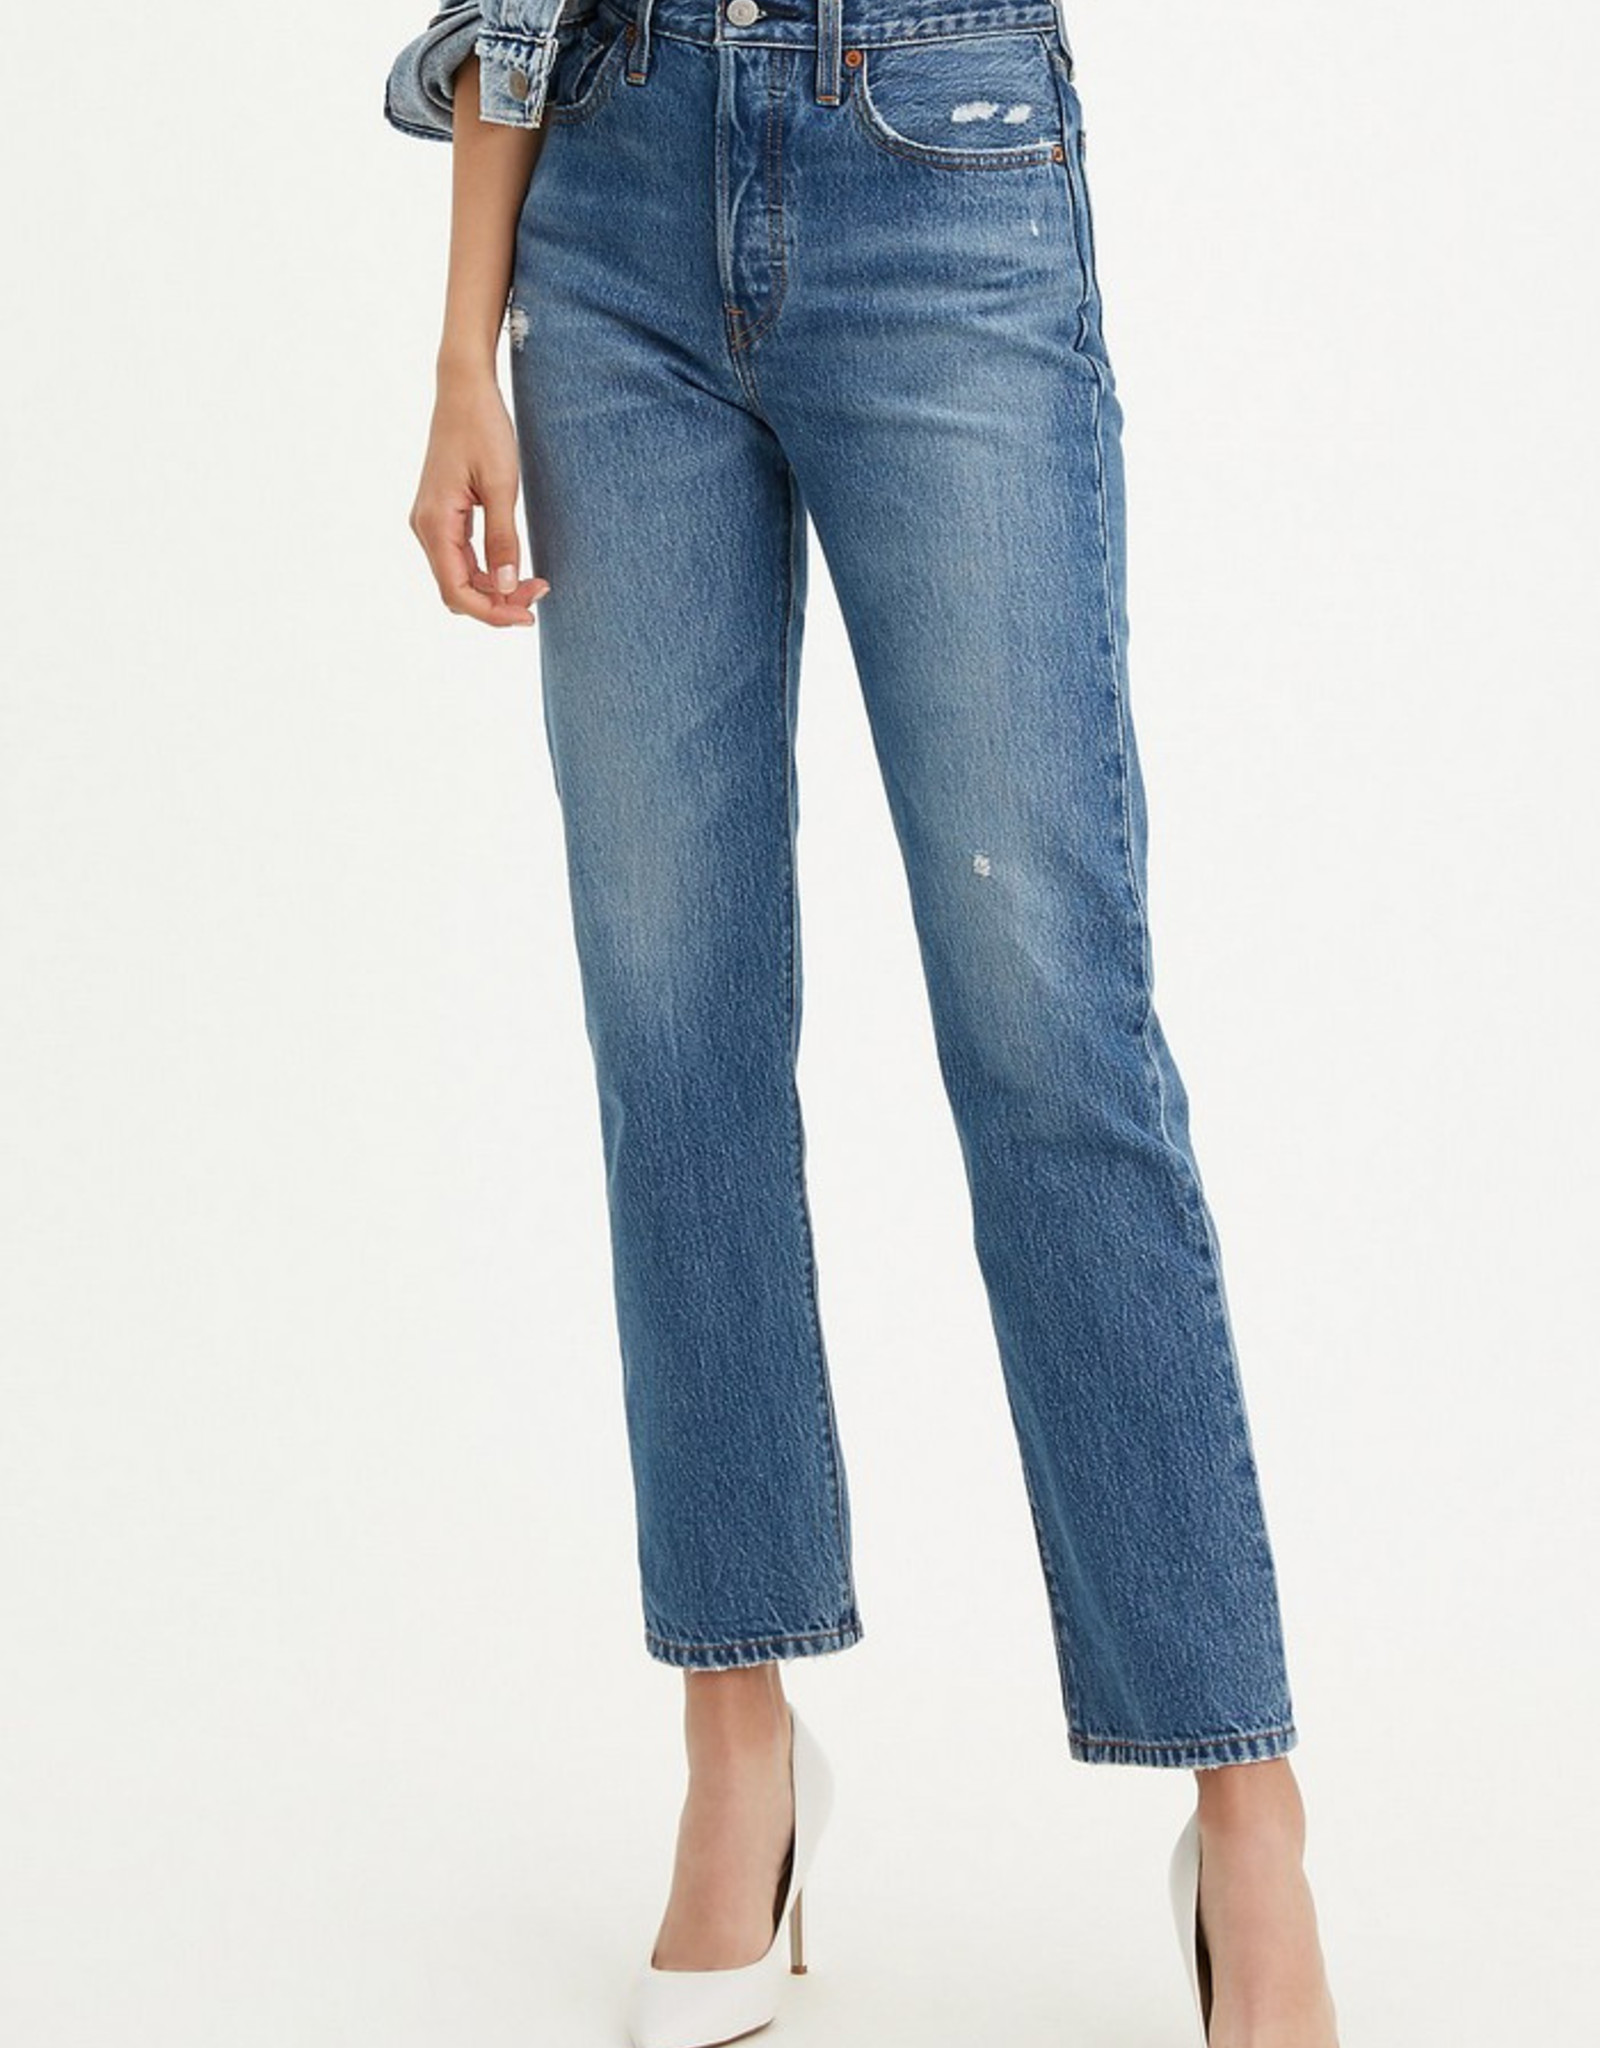 Levi's 501® Jeans For Women Athens Dark